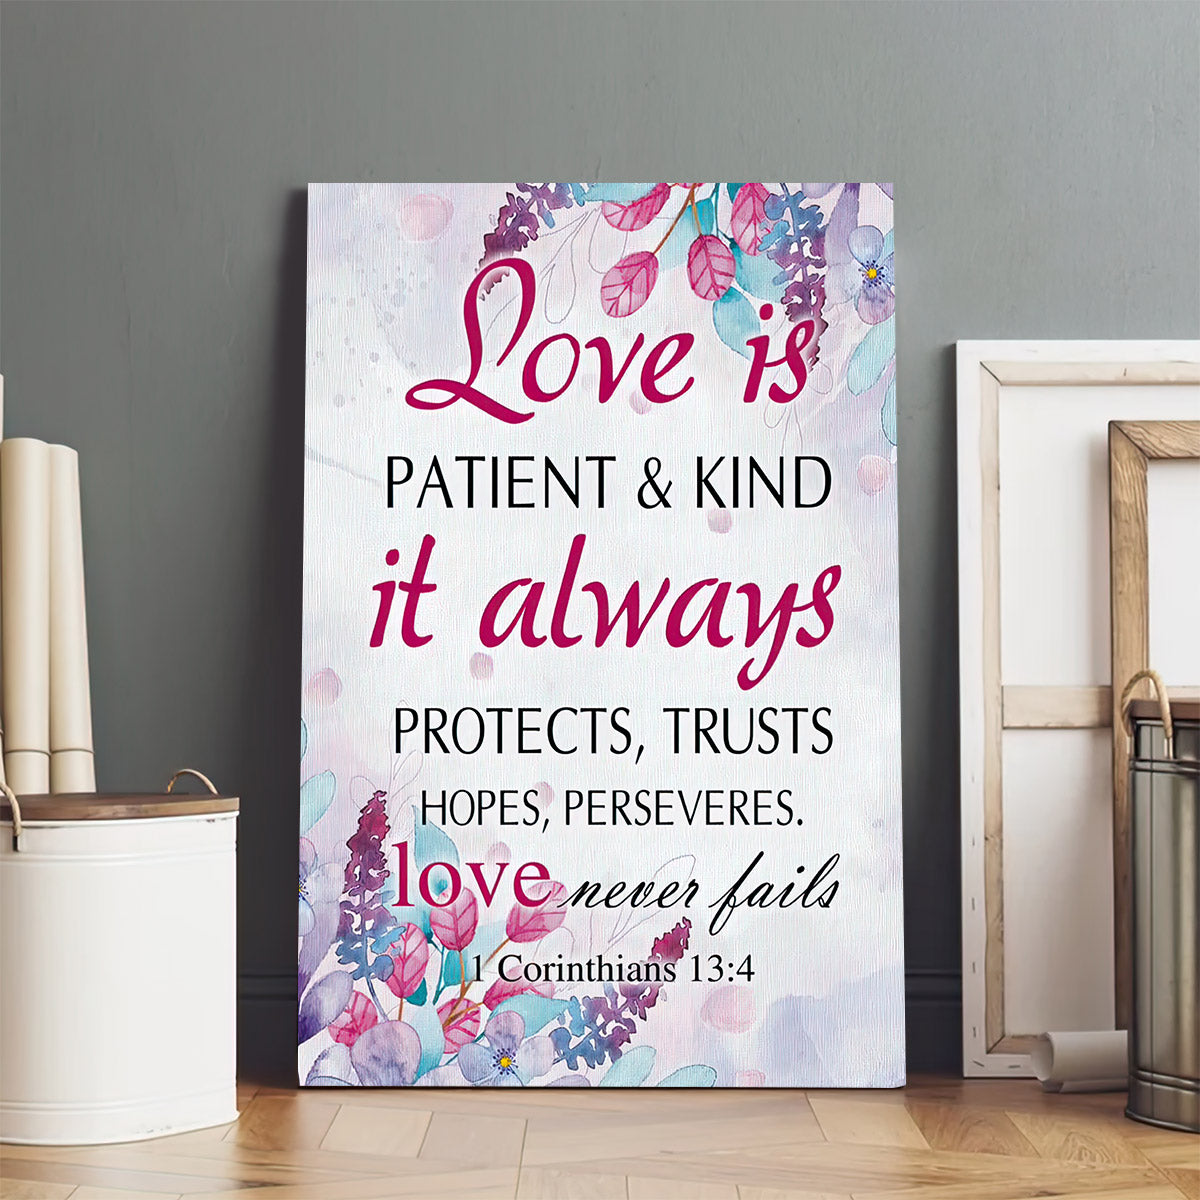 Love Is Patient And Kind Poster Canvas - 1 Corinthians 13 4 Hanging Wall Art